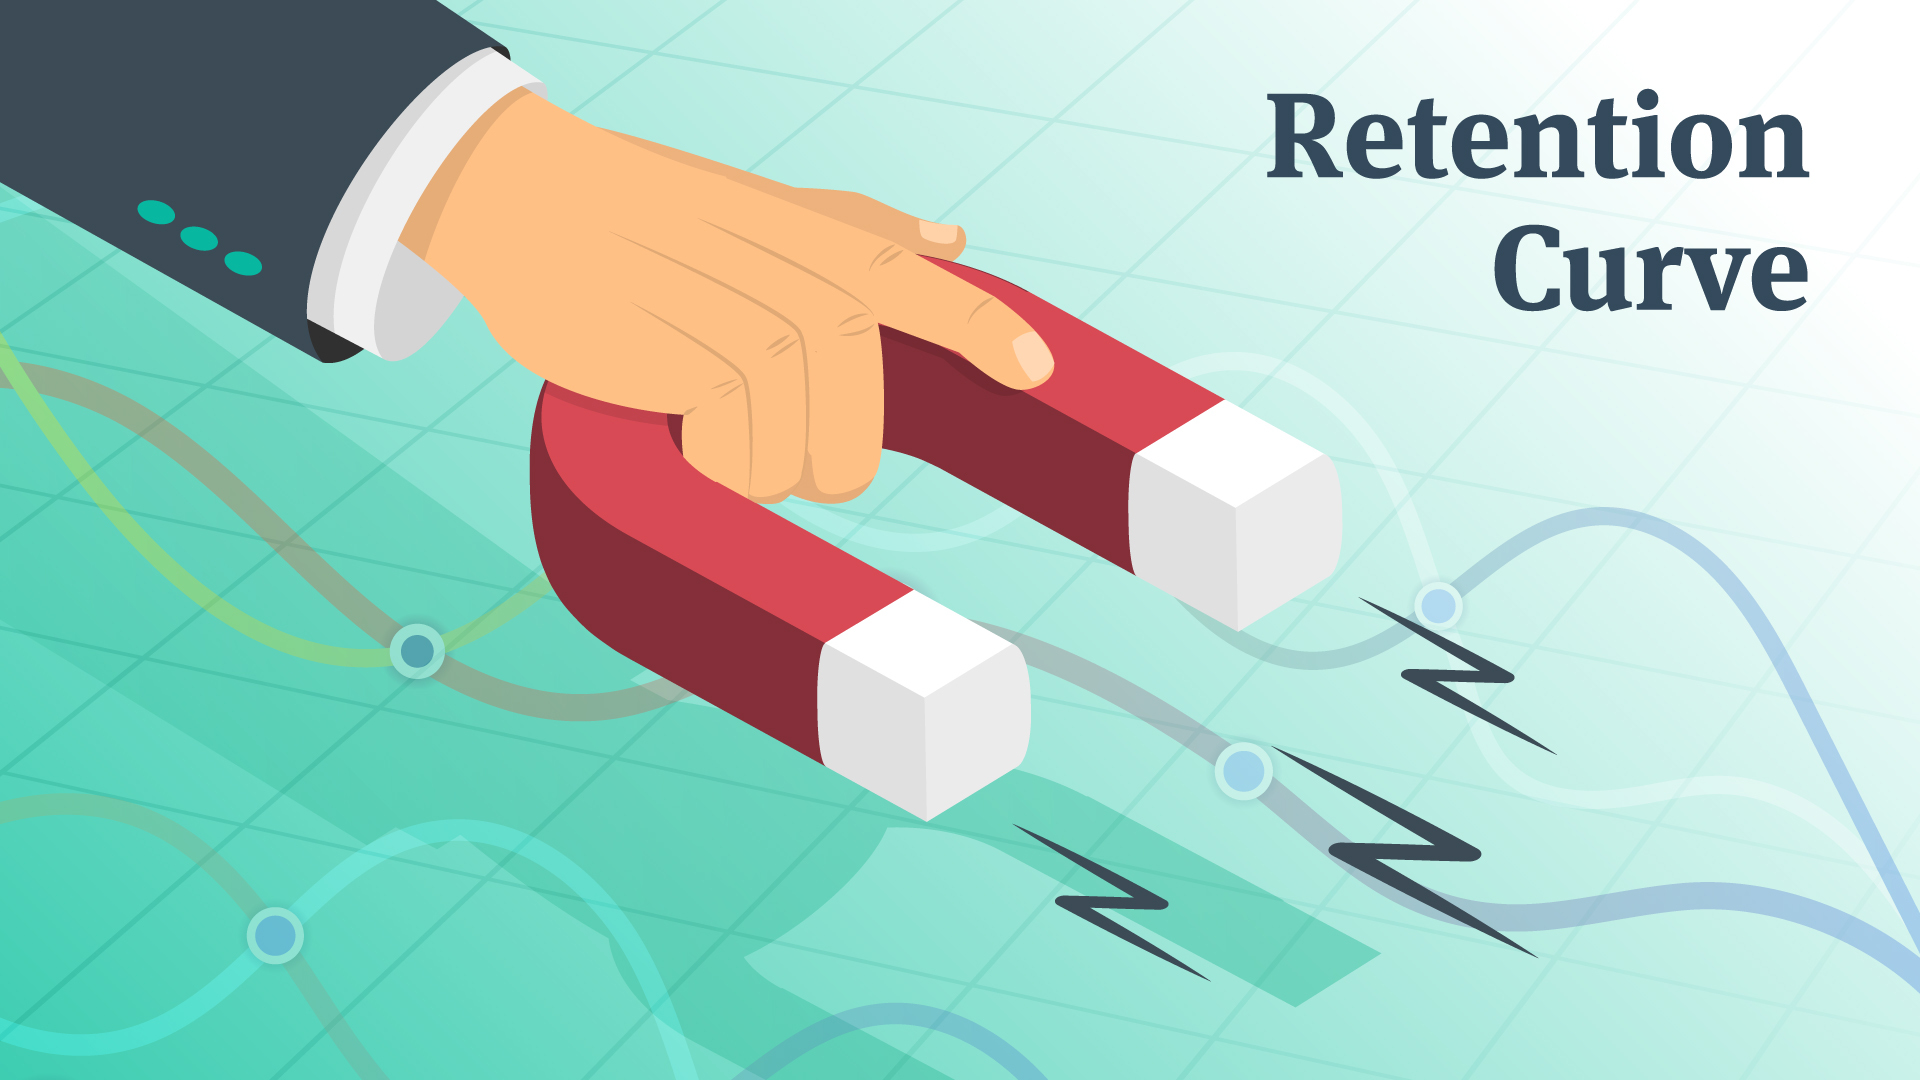 Retention curve 101 Definition, types & how to analyze